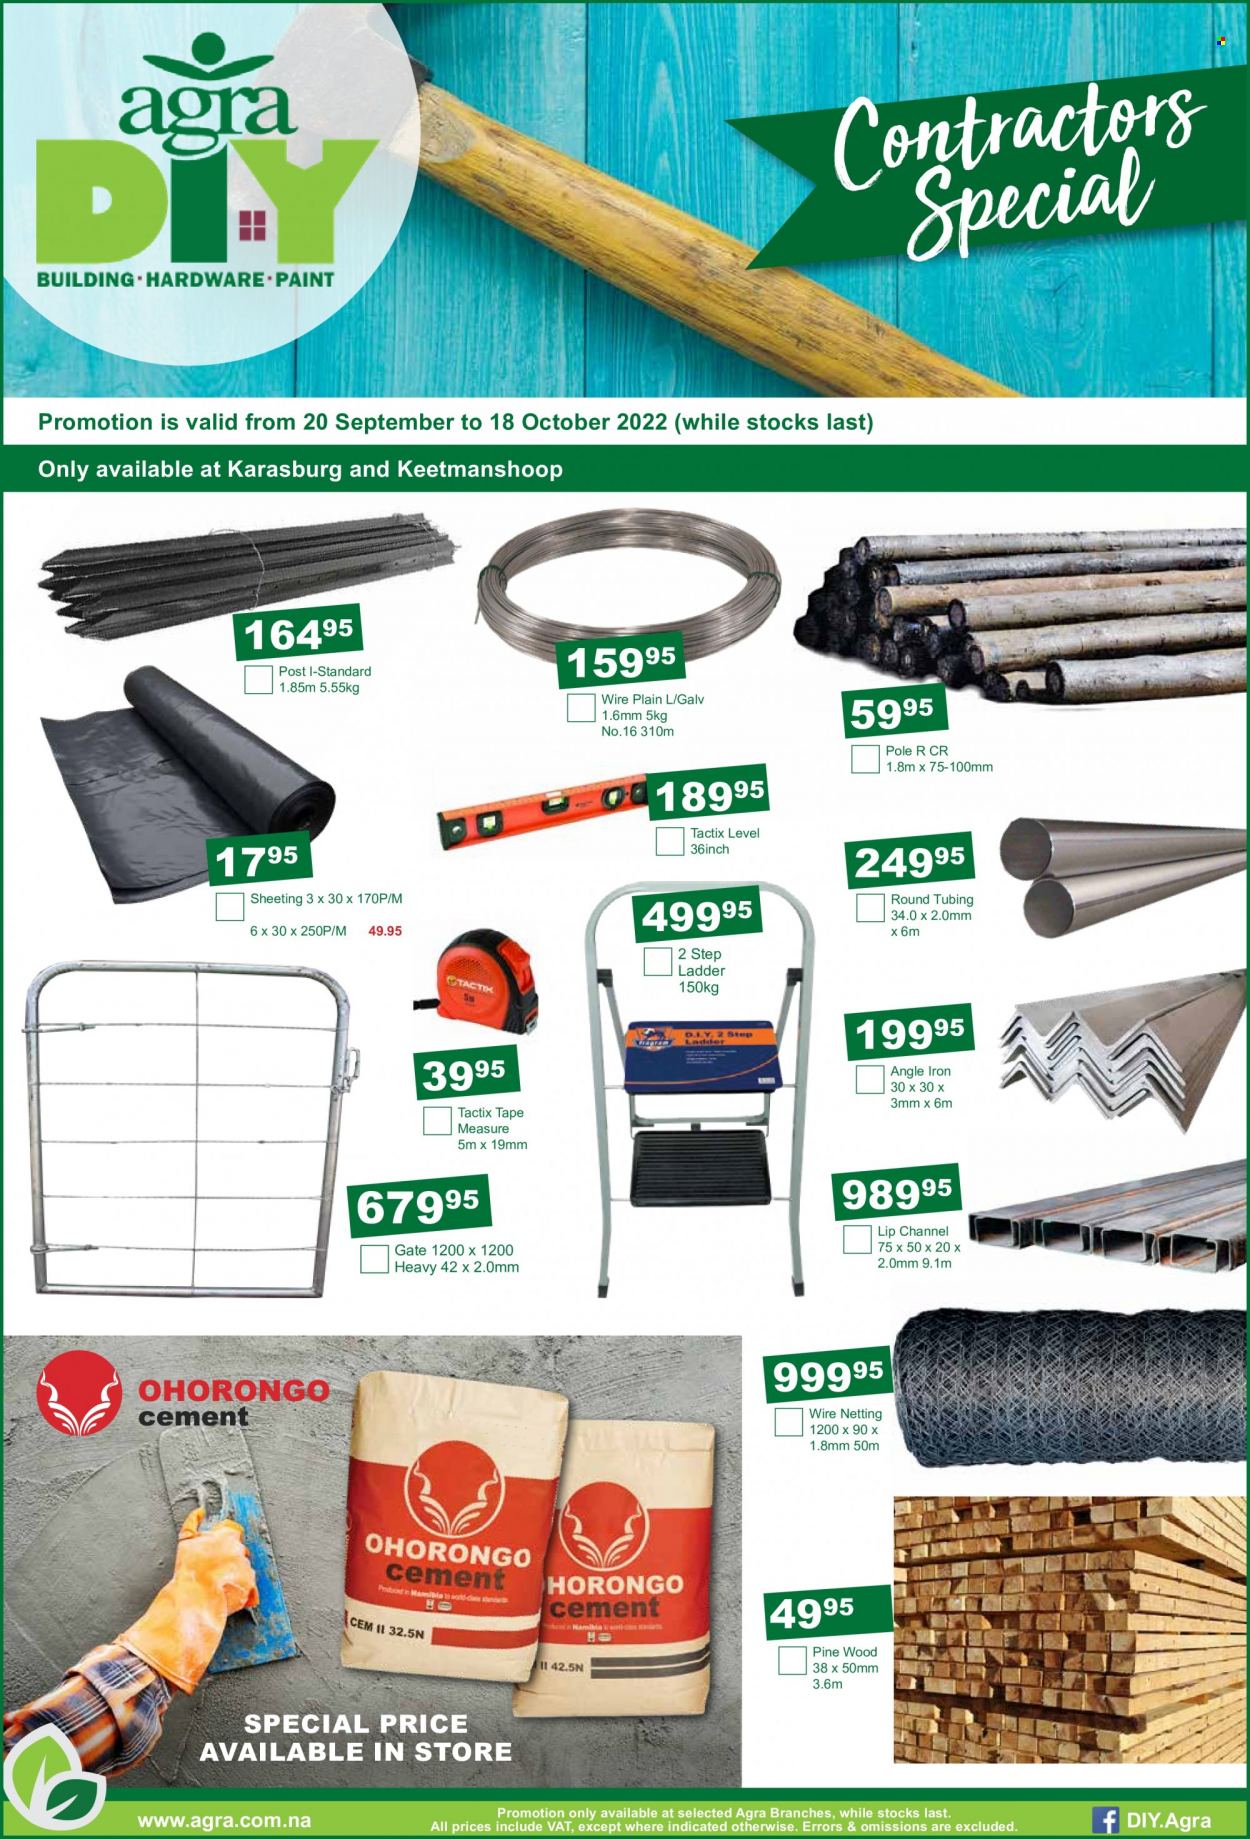 thumbnail - Agra catalogue  - 20/09/2022 - 18/10/2022 - Sales products - ladder, sheeting, paint, measuring tape. Page 6.